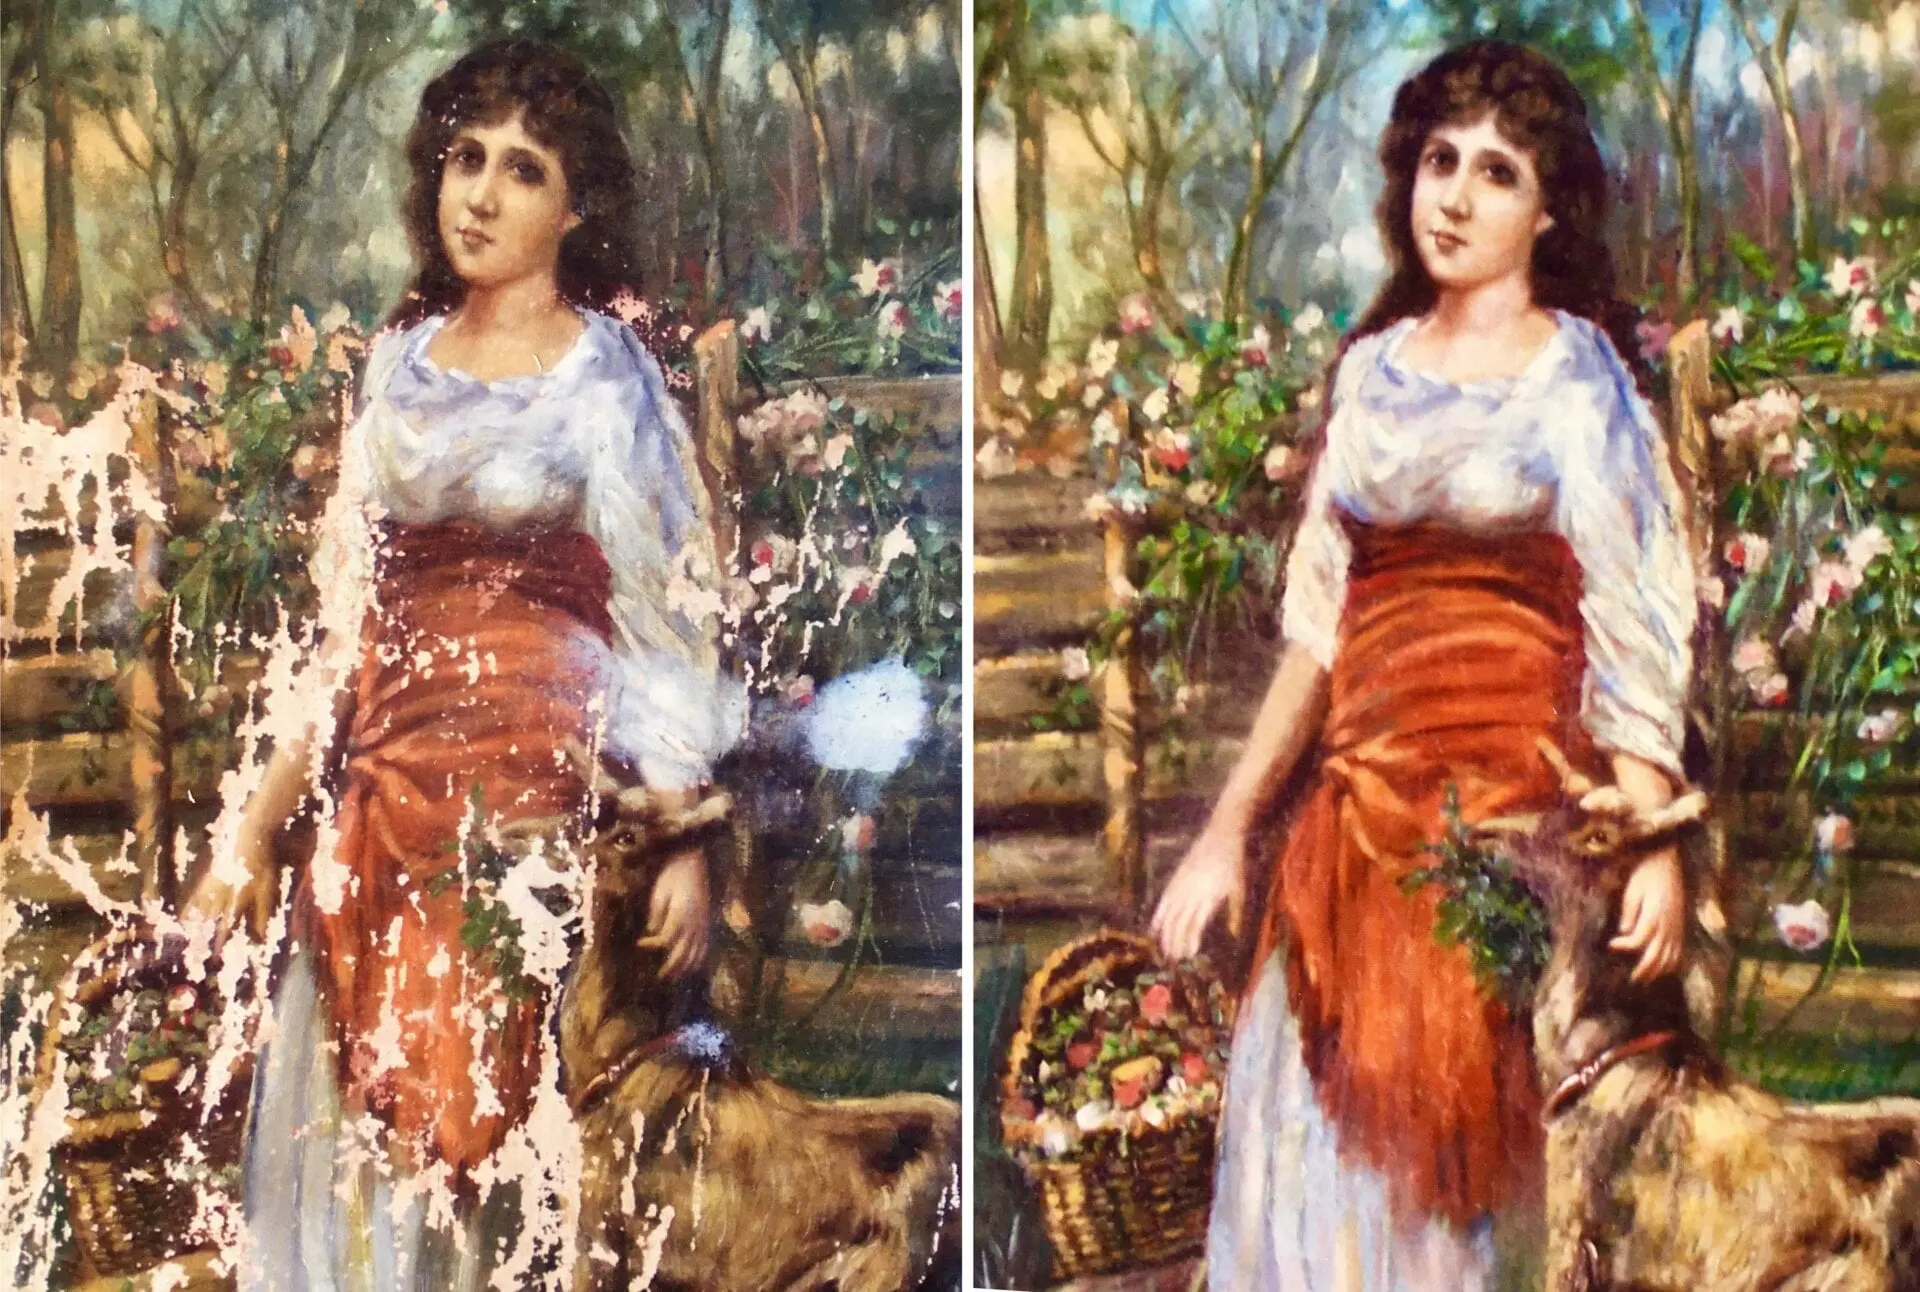 A painting of a woman in a dress and holding a basket.